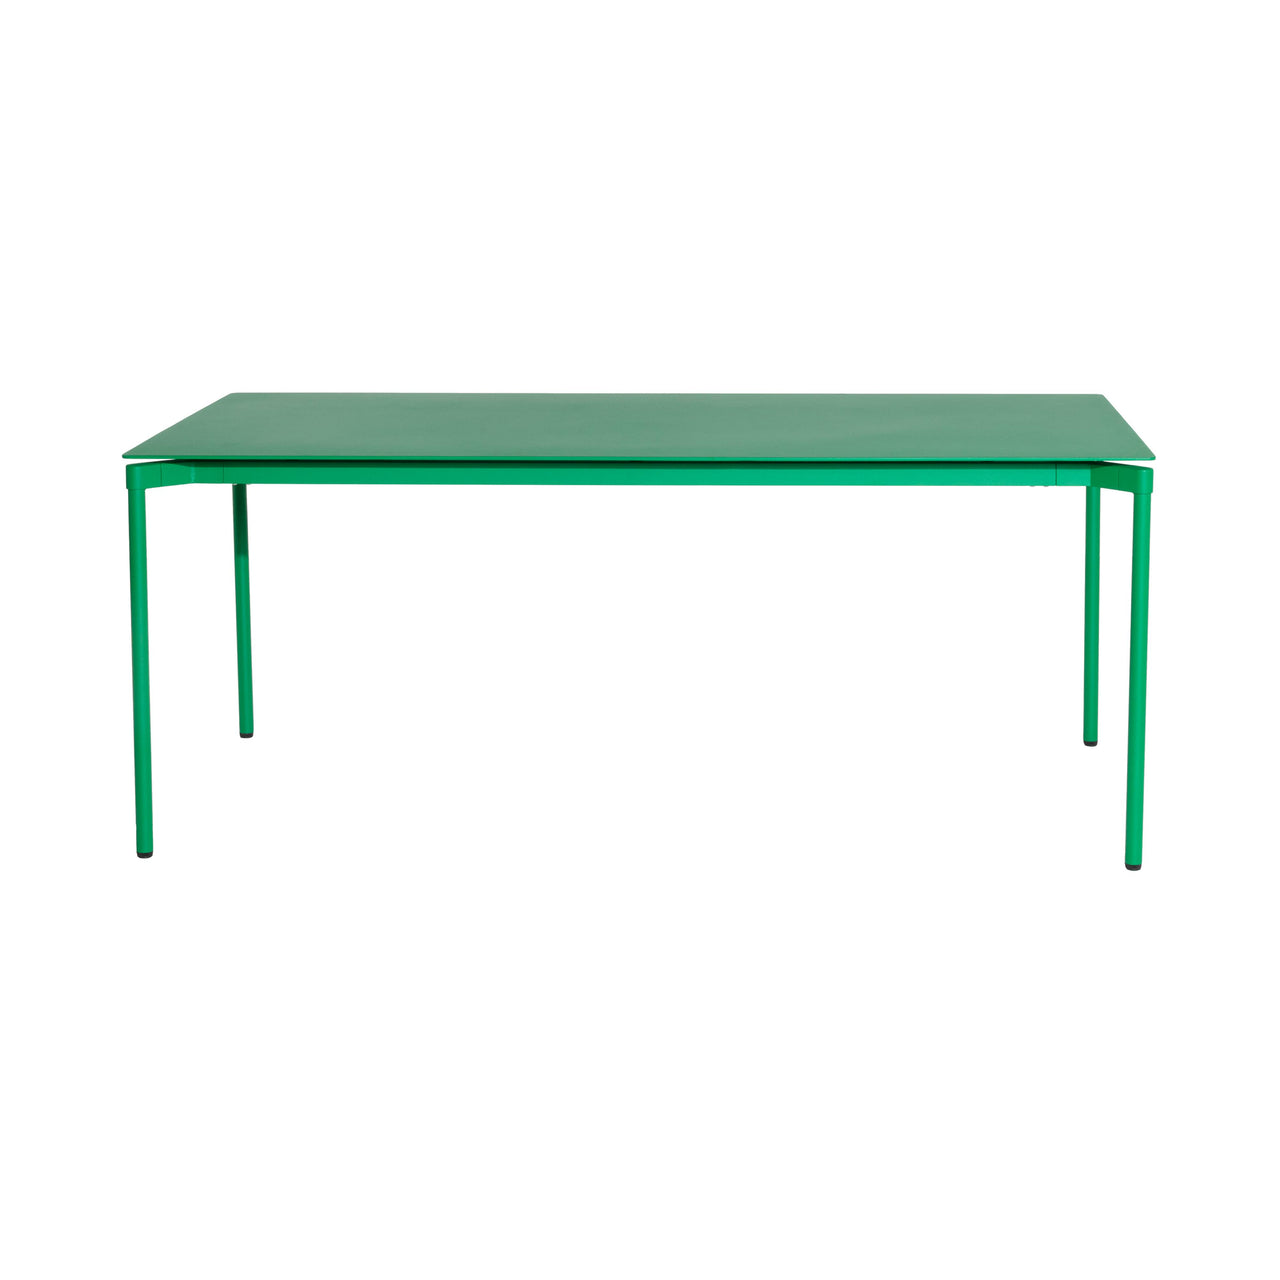 Fromme Dining Table: Outdoor + Rectangle + Mint Green